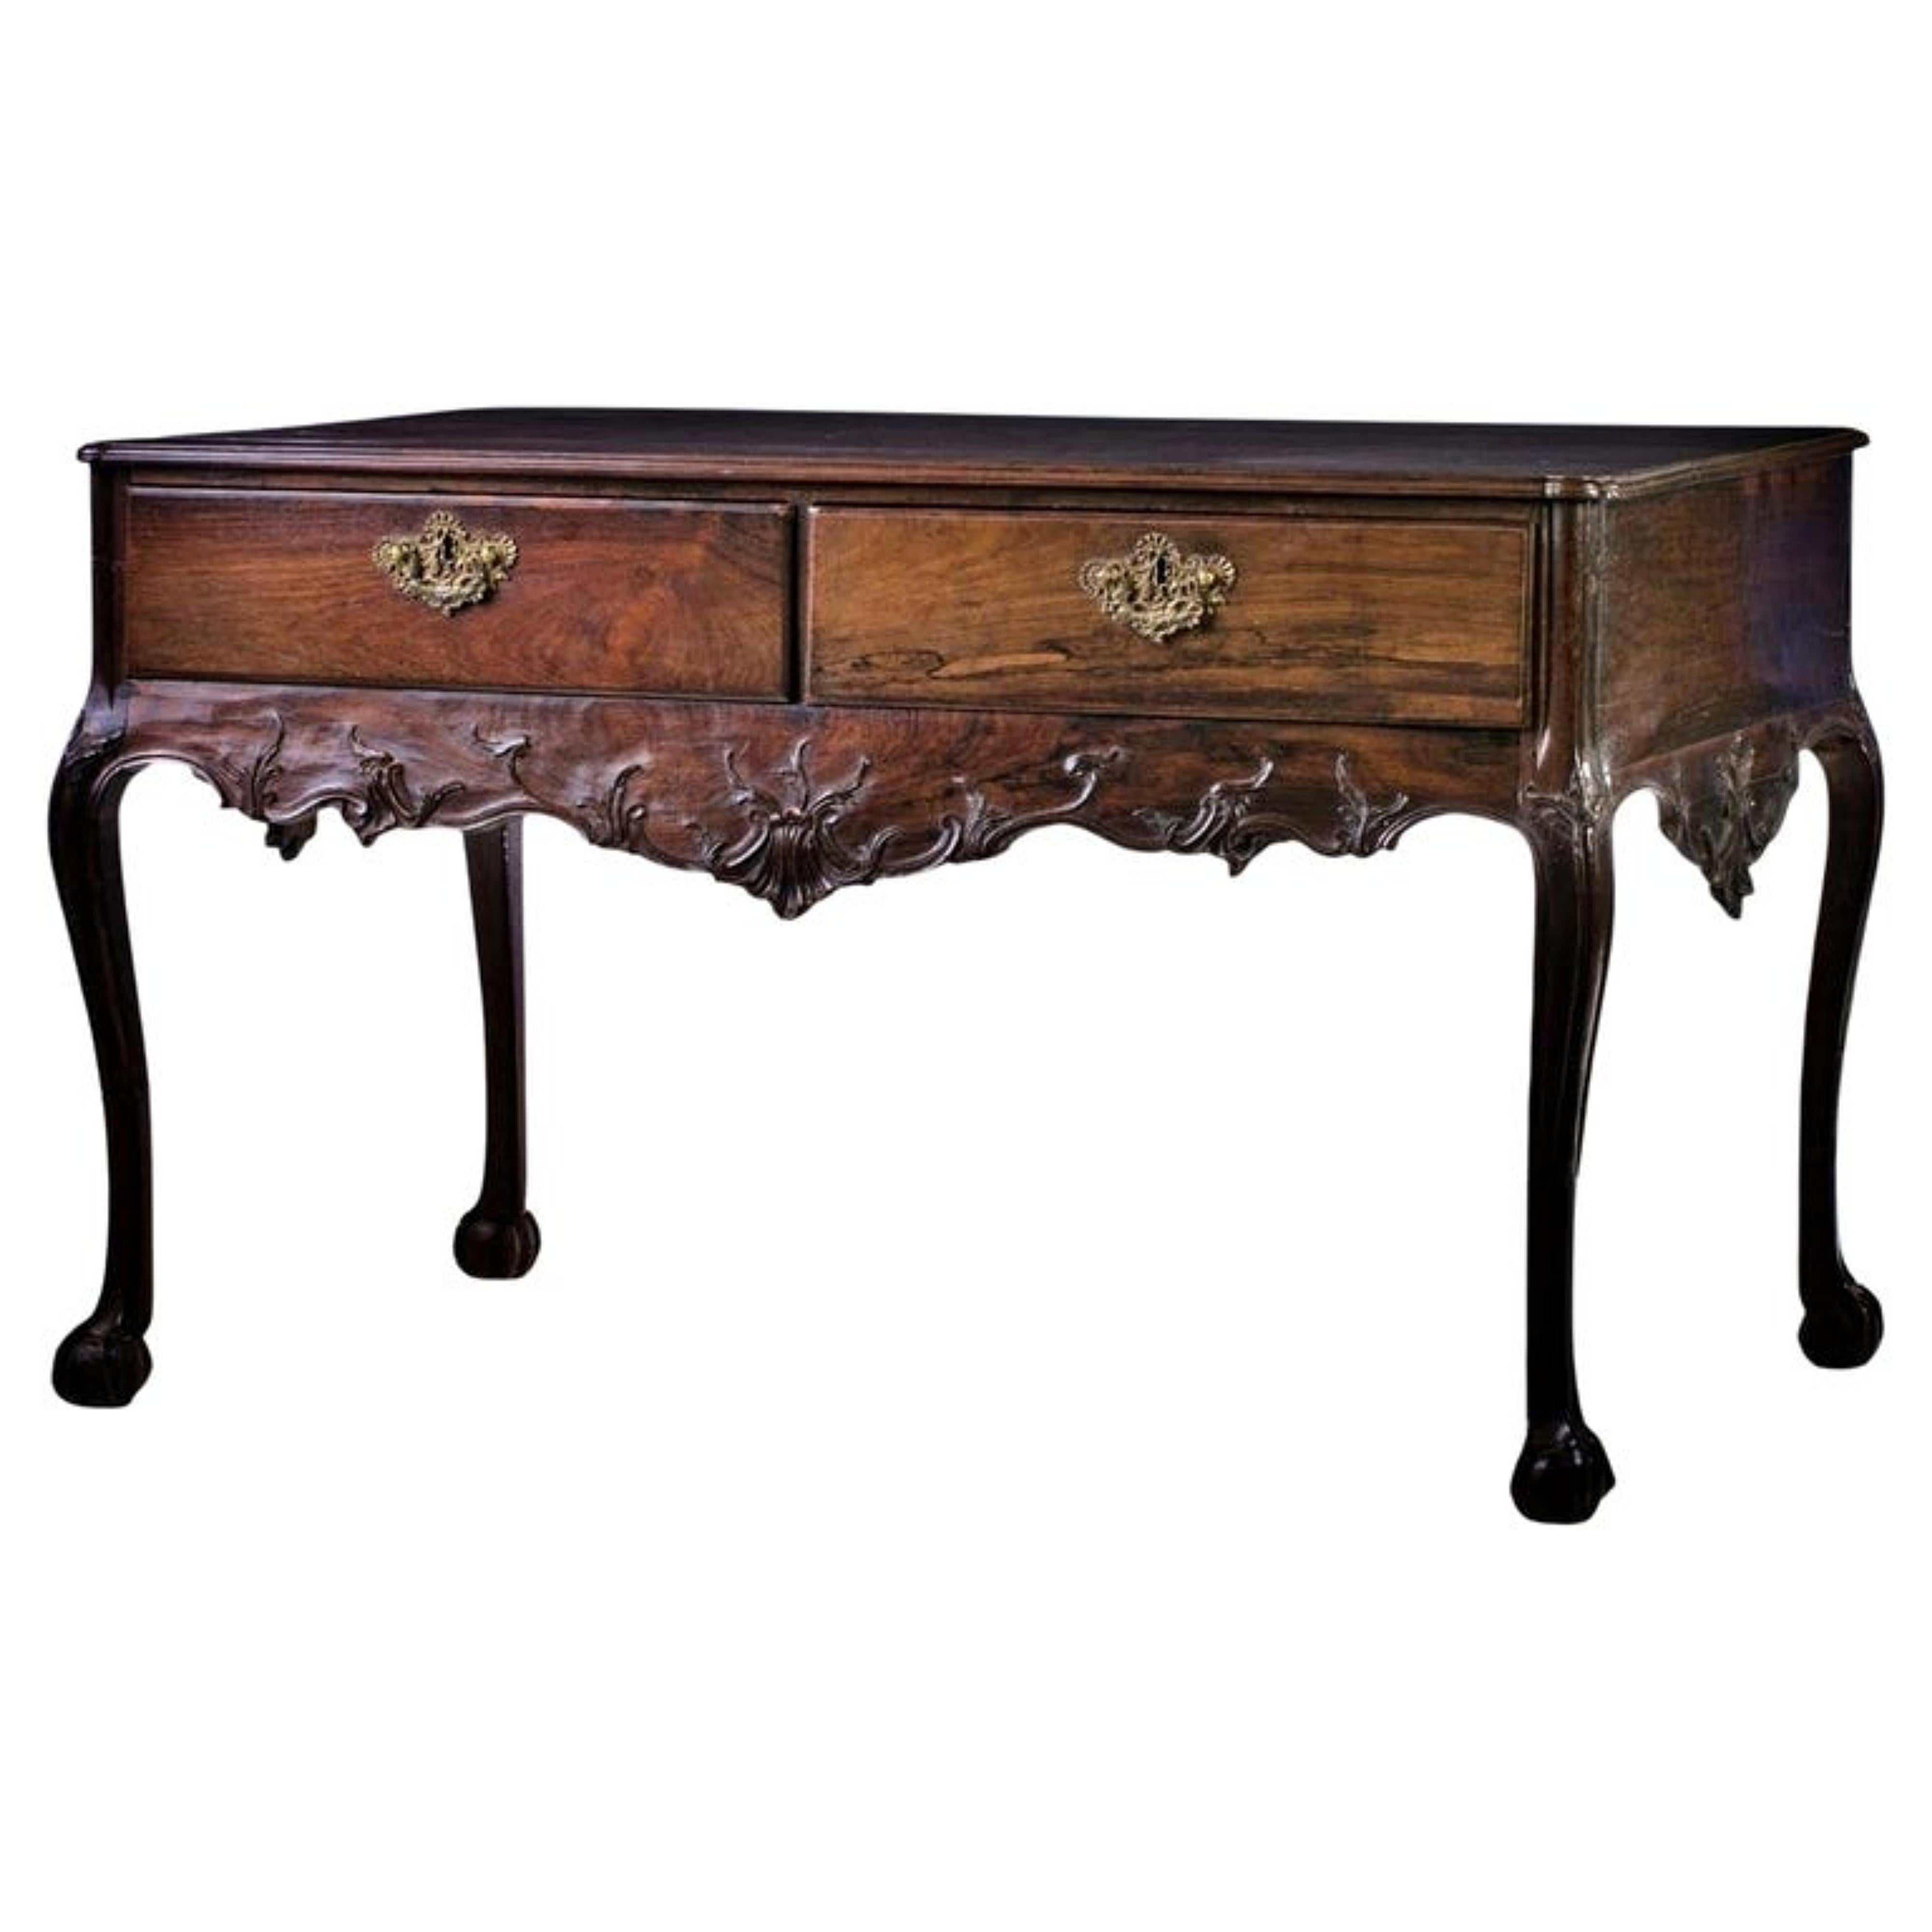 Rare and Important Portuguese Center Table, 18th Century For Sale 7